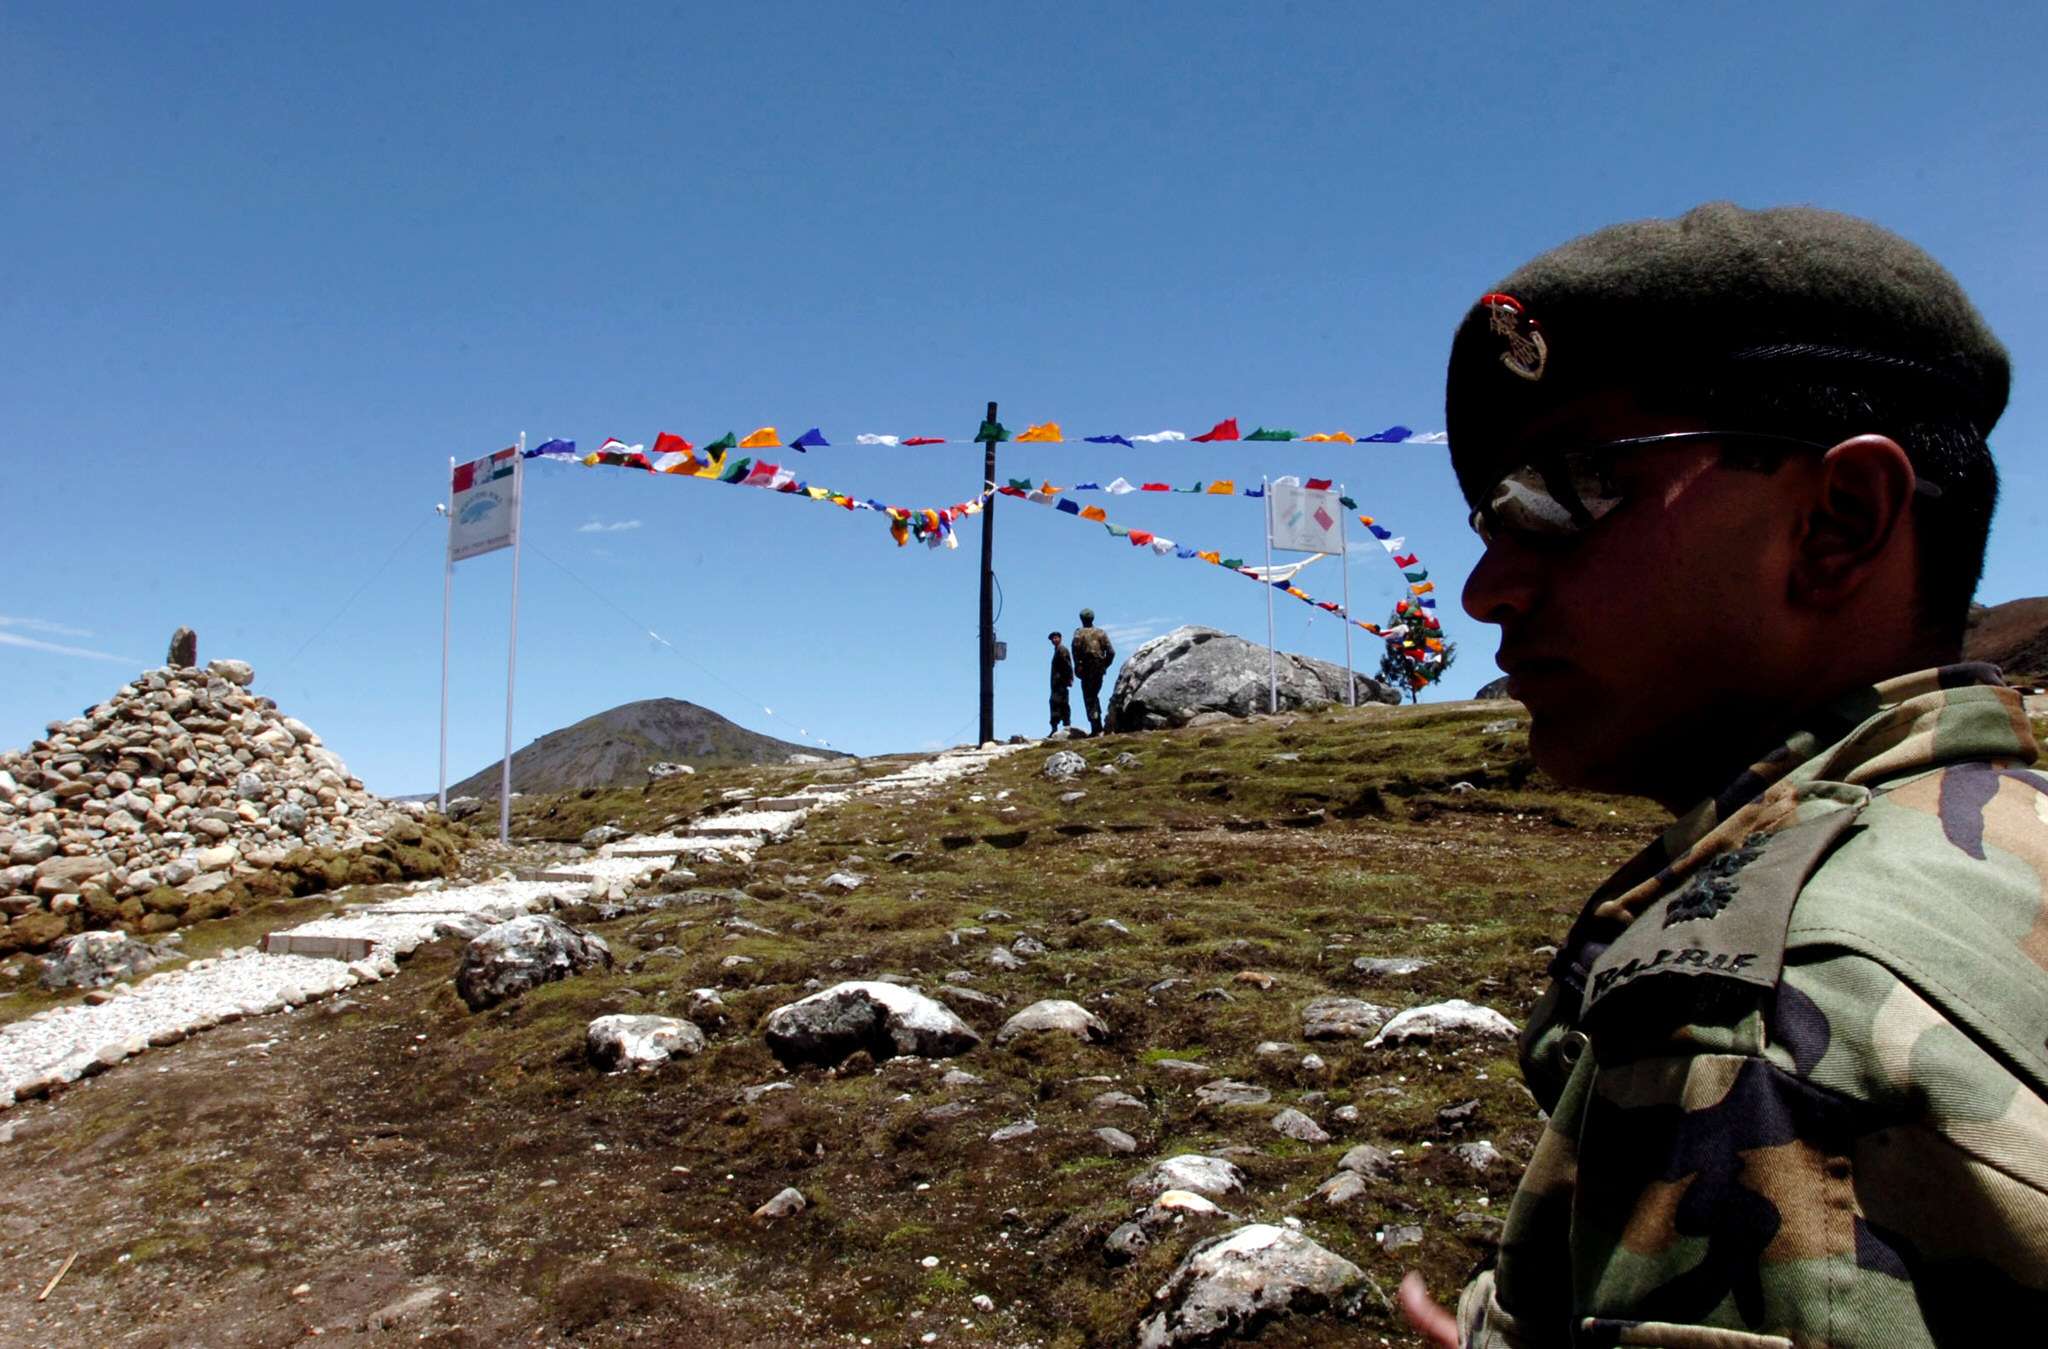 An Indian army major watches Indian post at a 15,500ft high mountain pass on the McMahon Line, about 47km from Tawang, in Bumla, Arunachal Pradesh. Photo: AFP